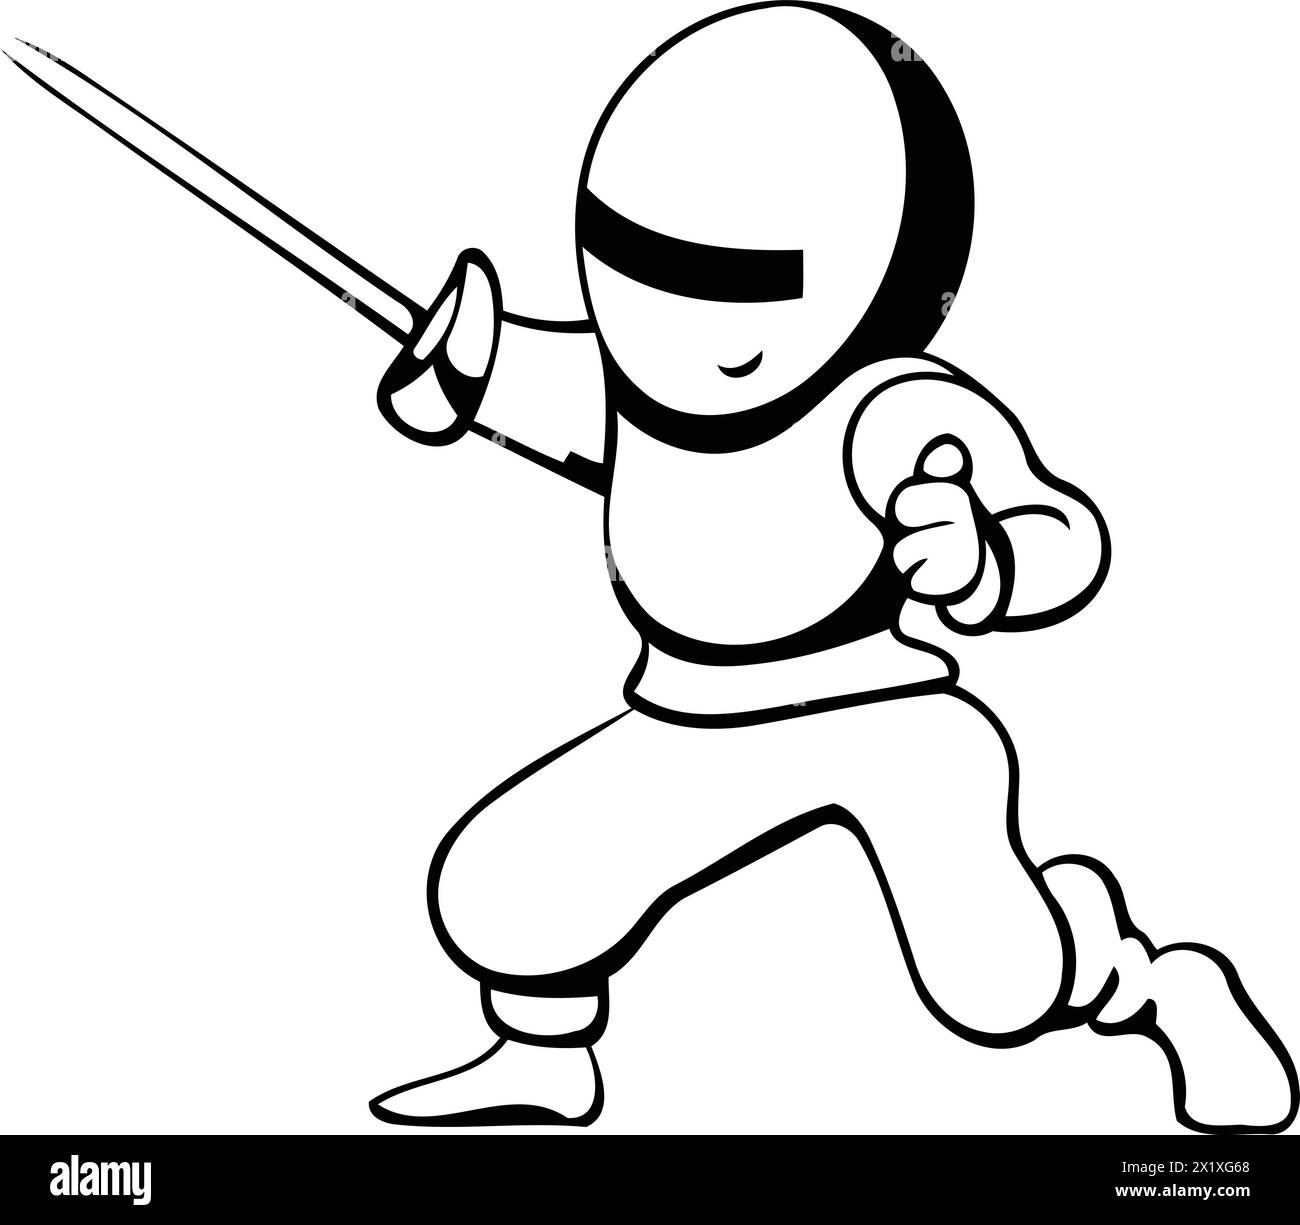 Fencer in white suit holding a sword. Cartoon style vector illustration. Stock Vector